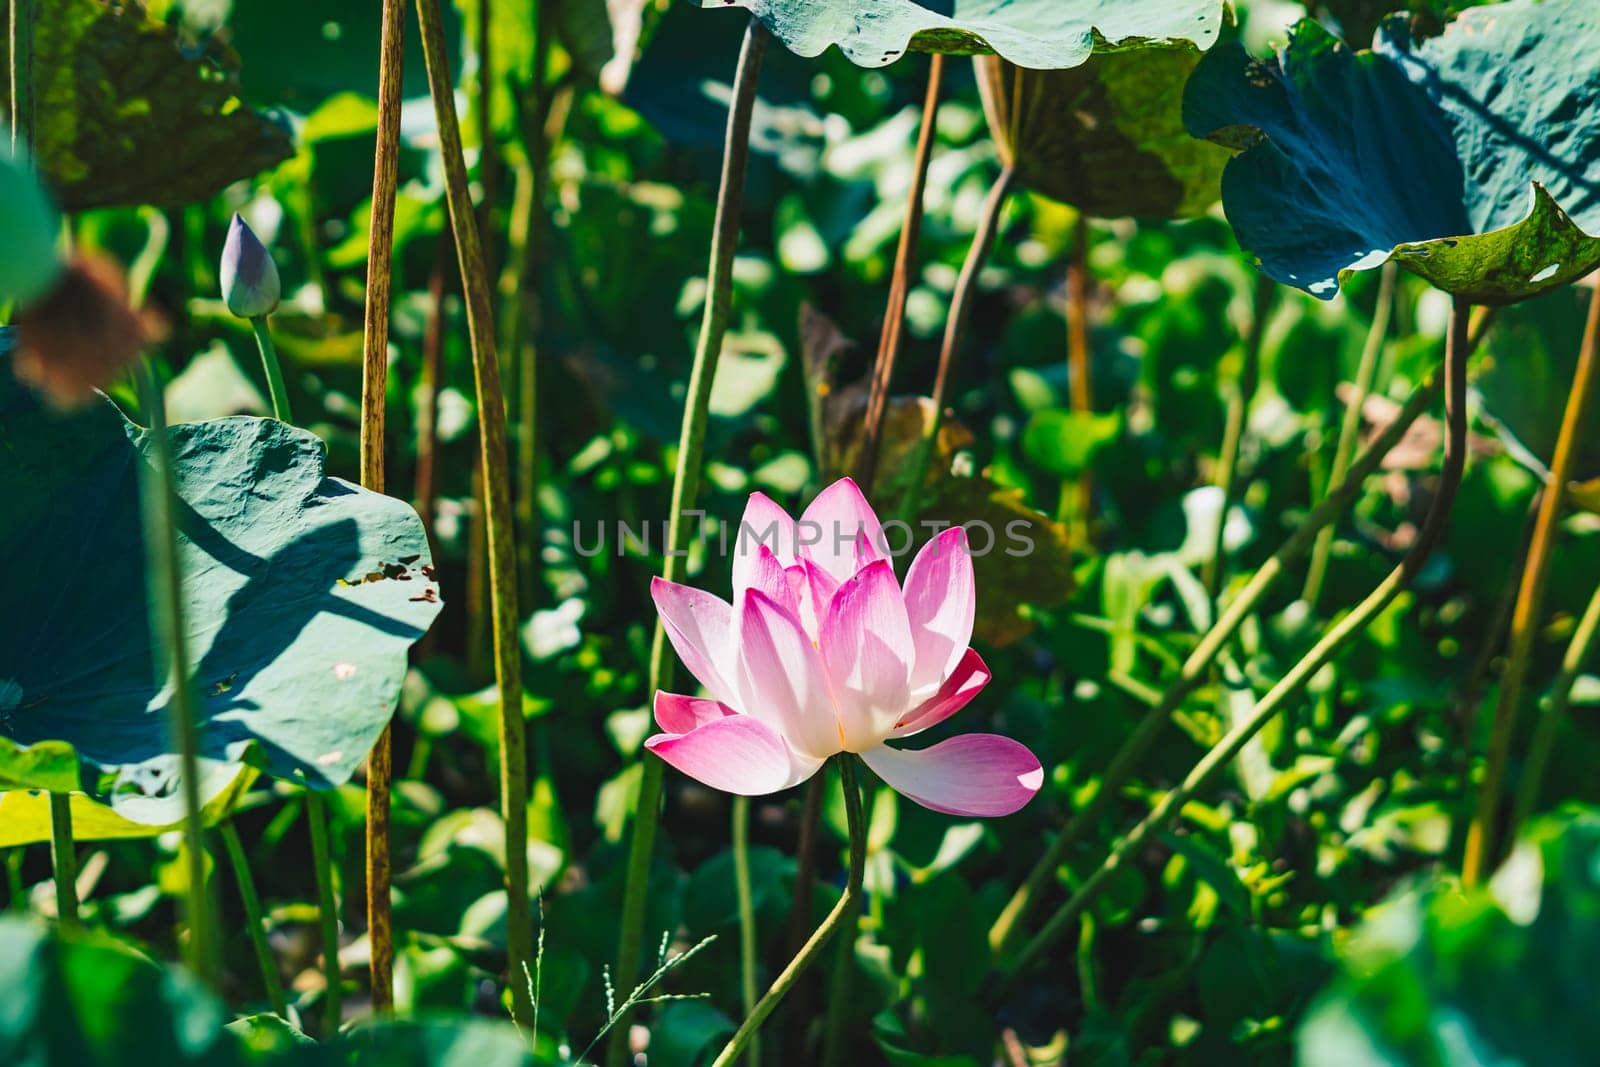 A pink lotus flower is surrounded by leaves and the sun is shining.